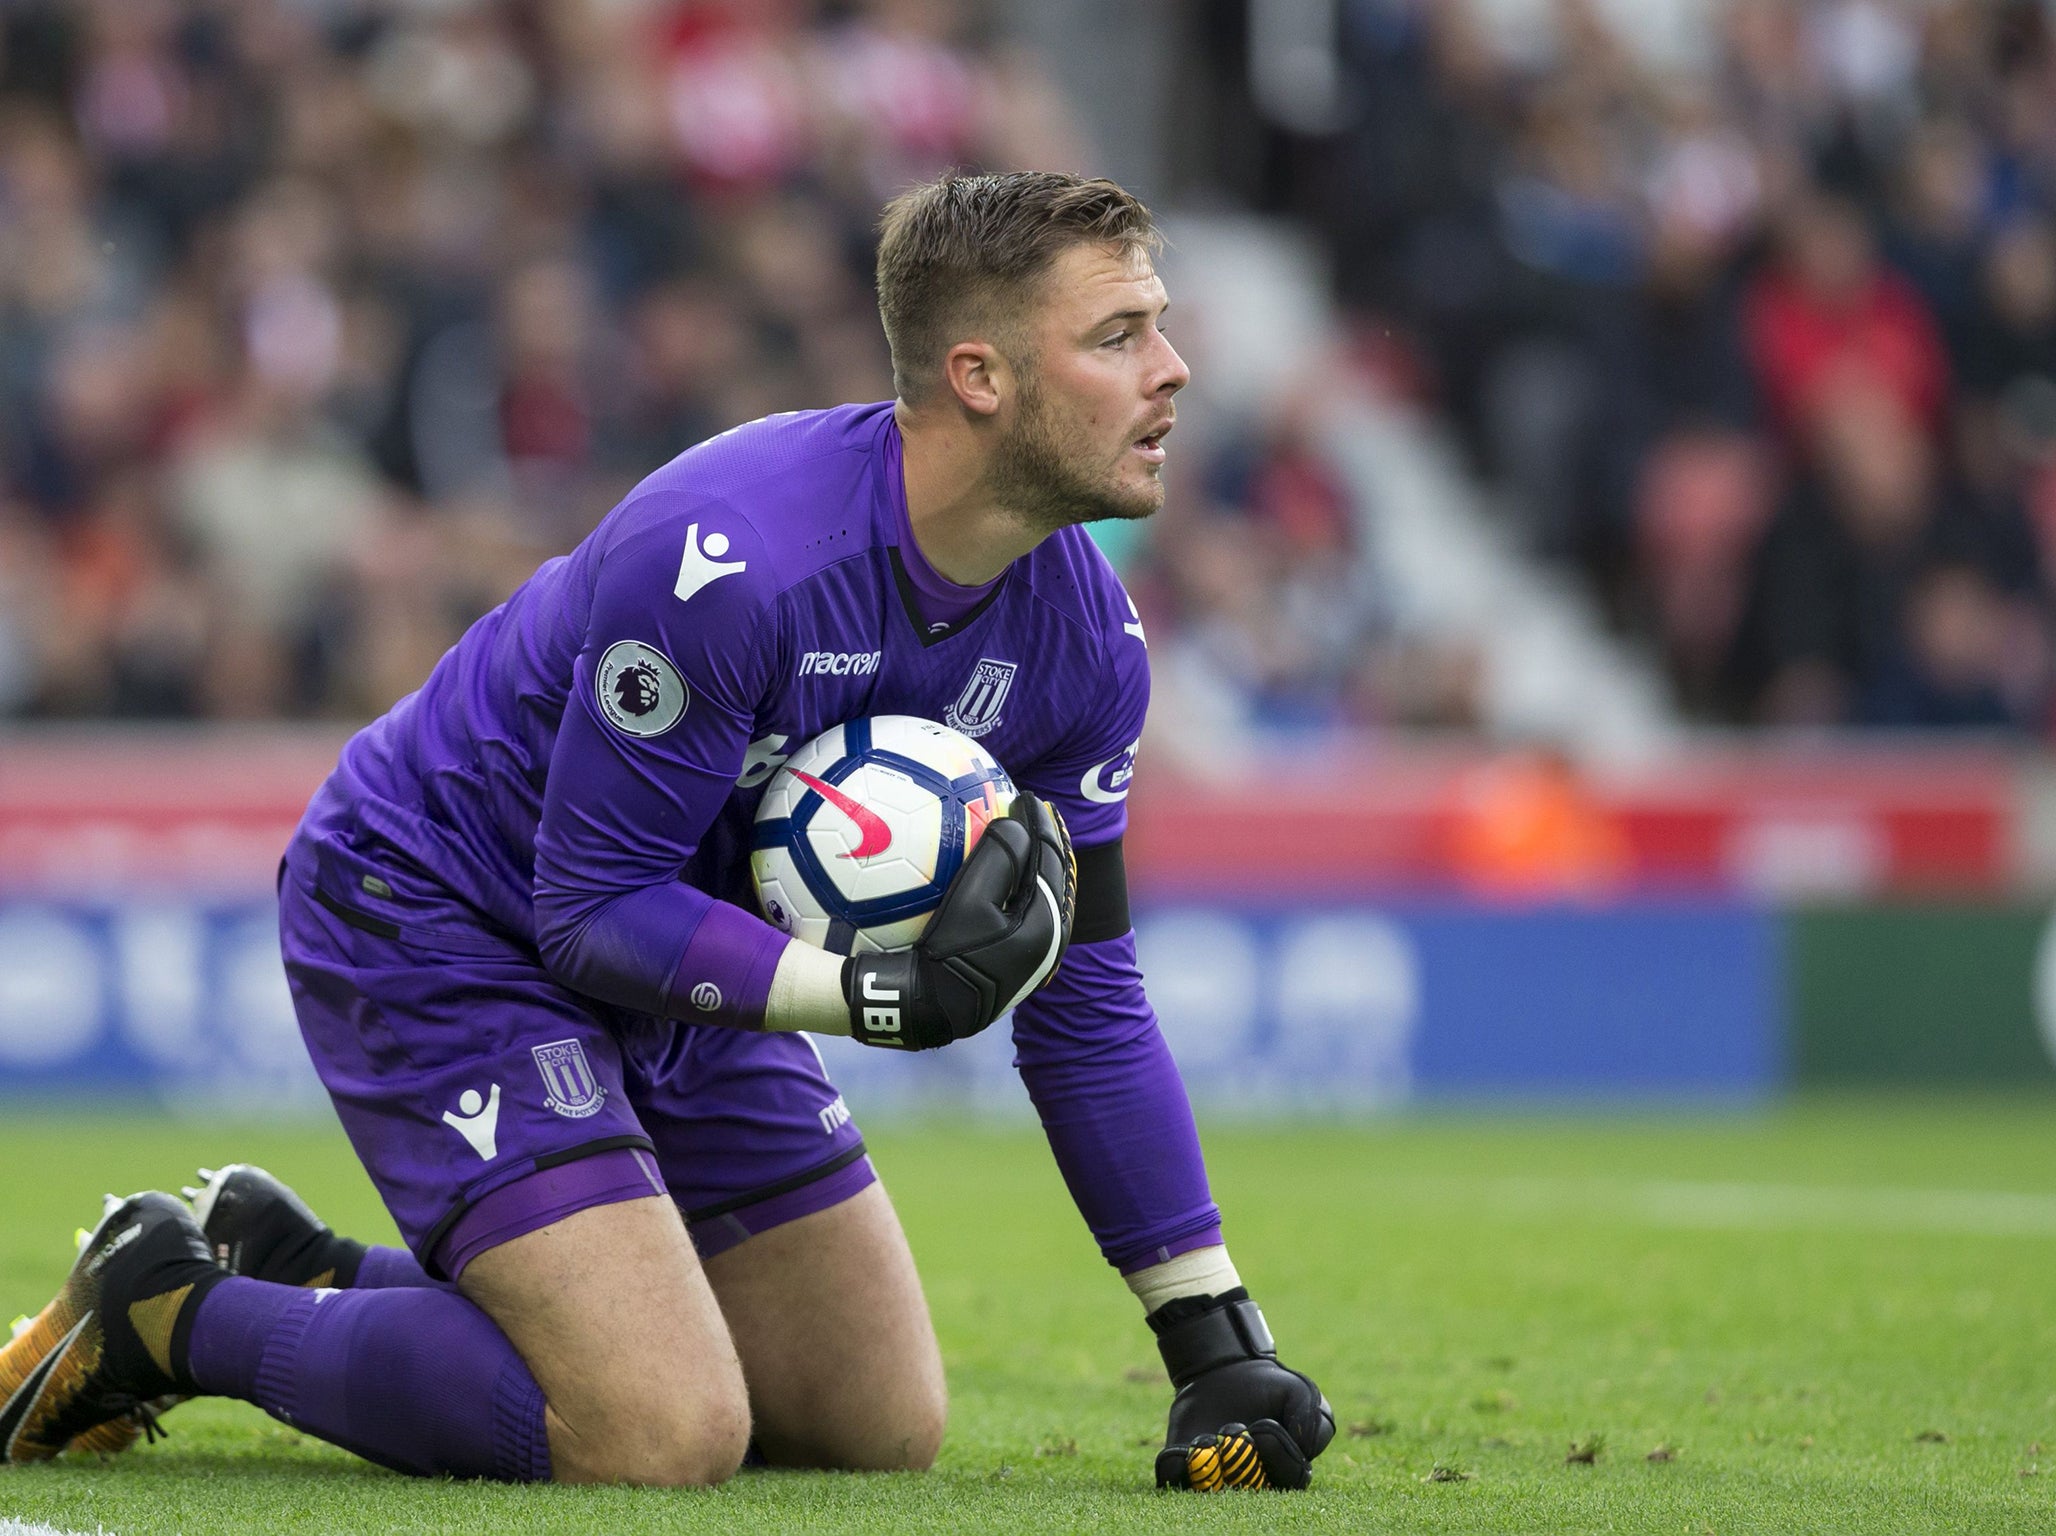 Butland is back from injury and in a good patch of form